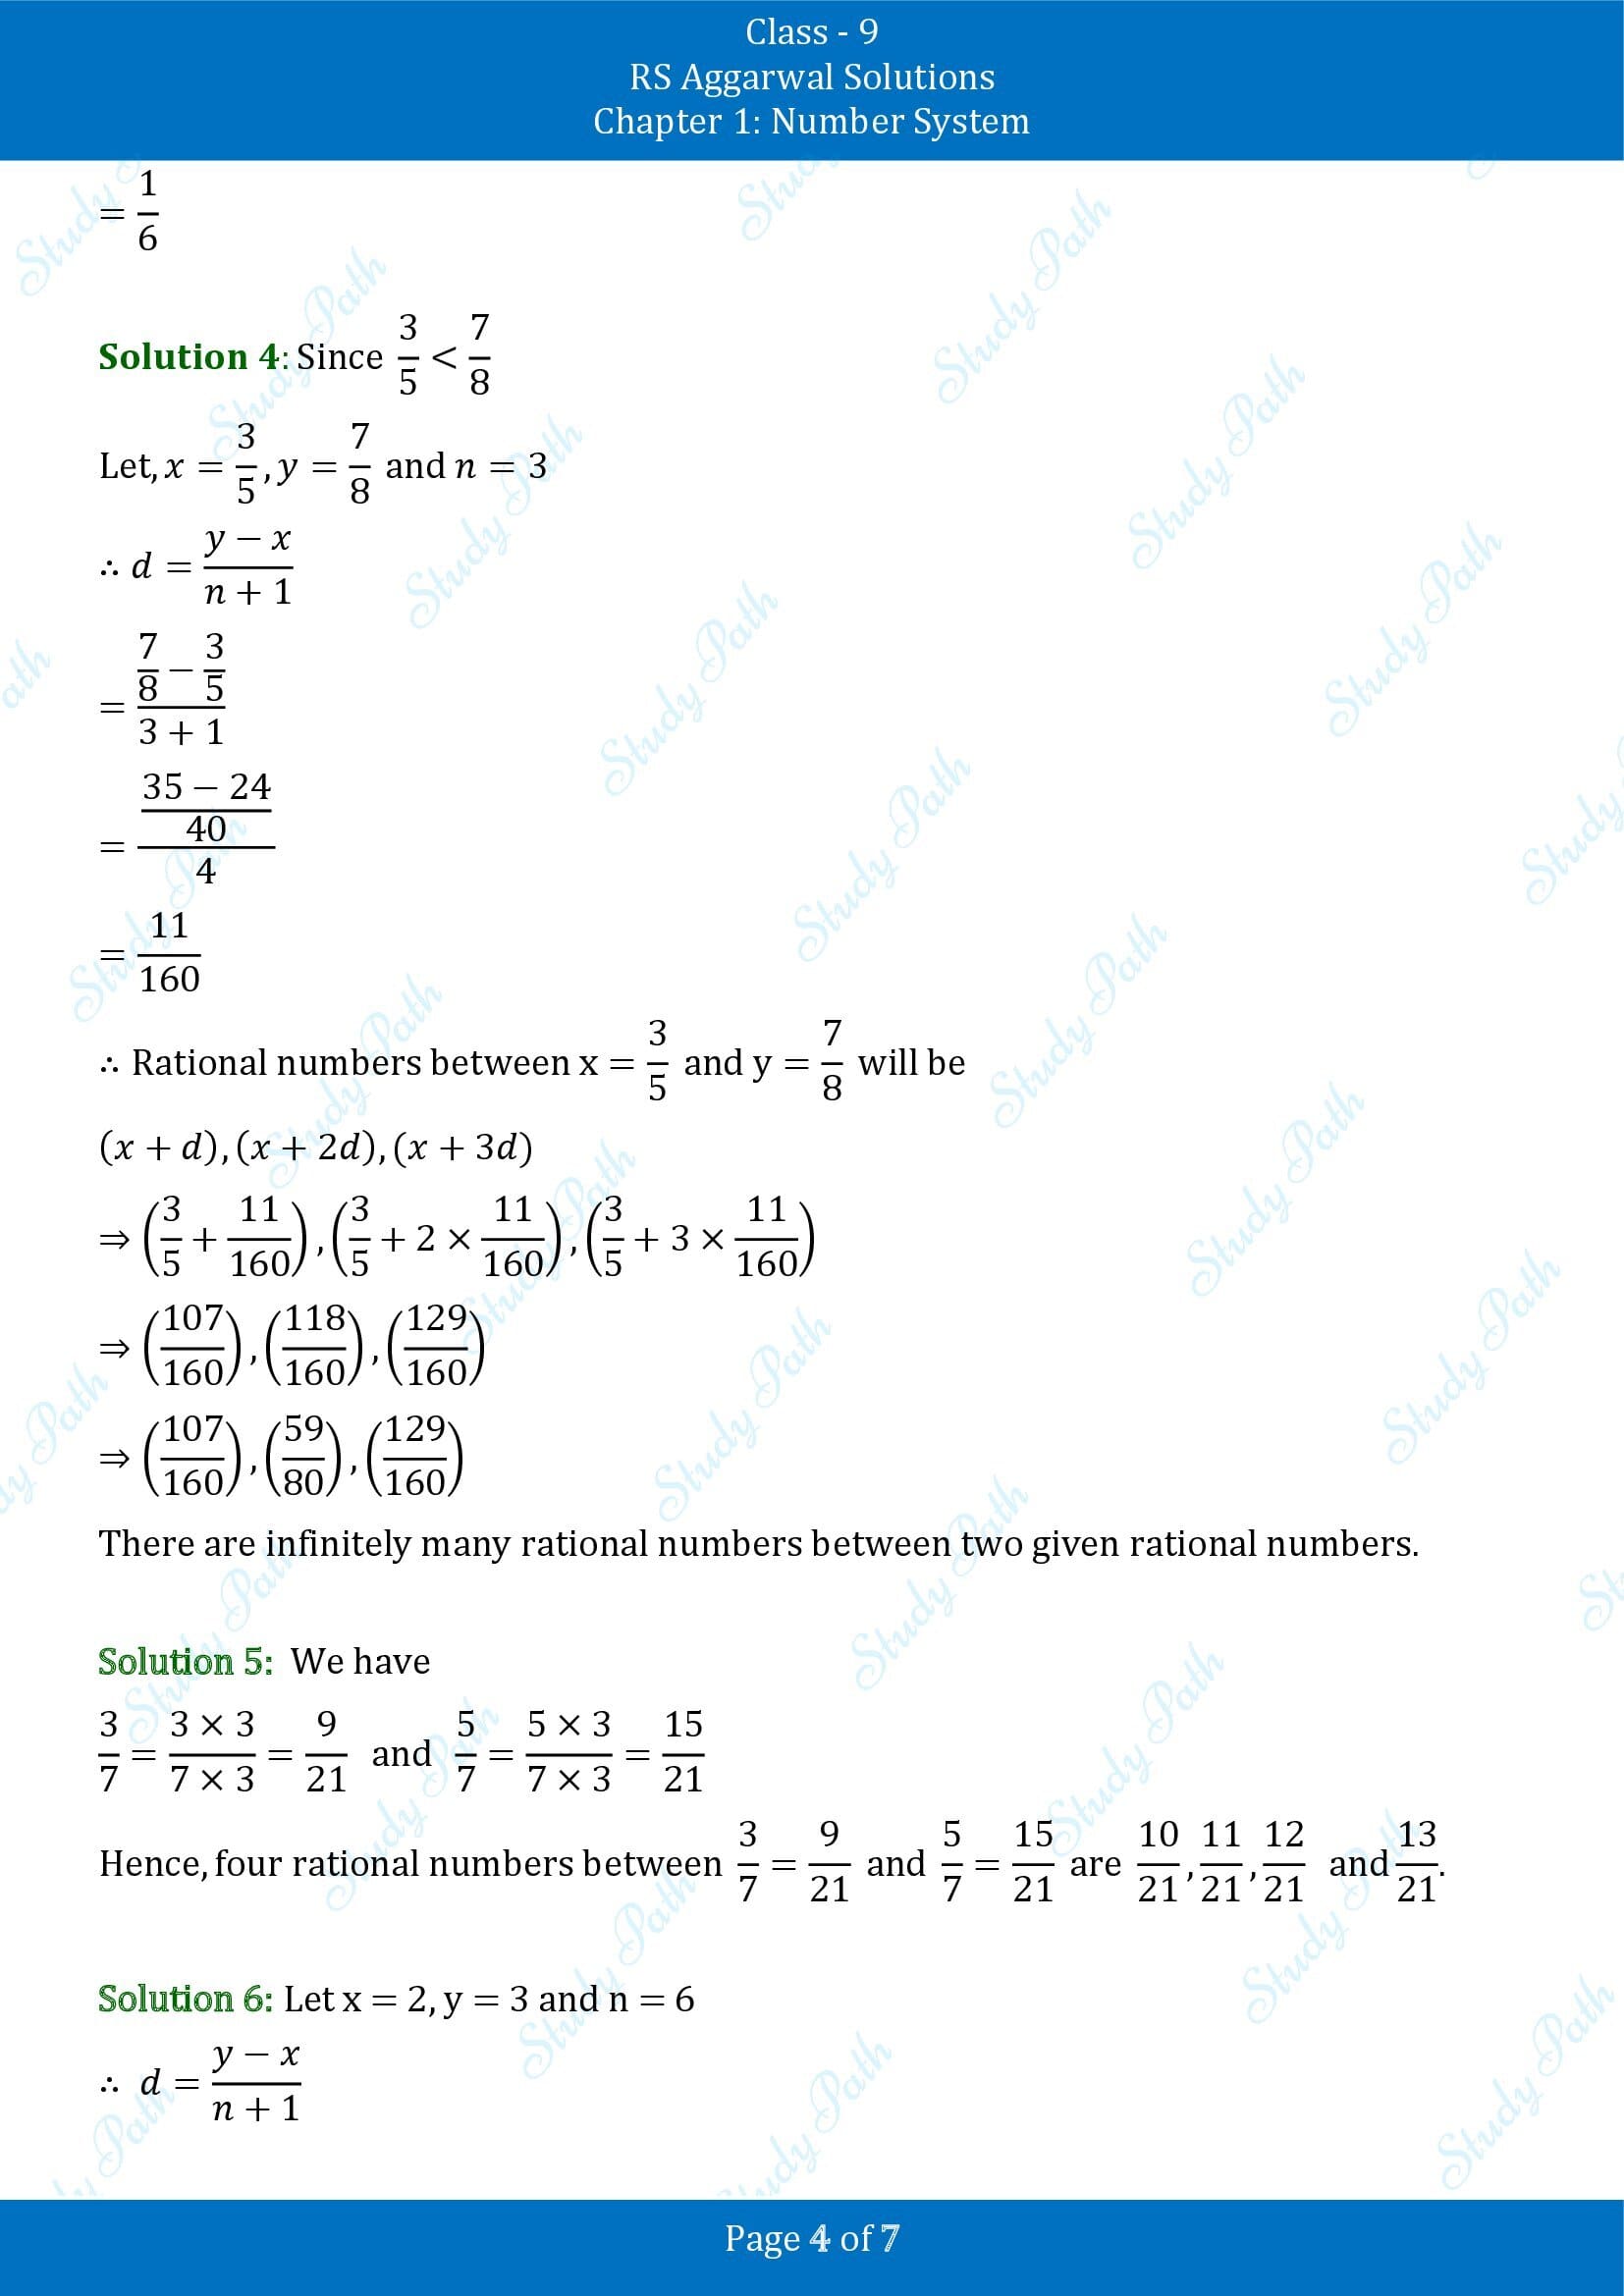 RS Aggarwal Solutions Class 9 Chapter 1 Number System Exercise 1A 00004